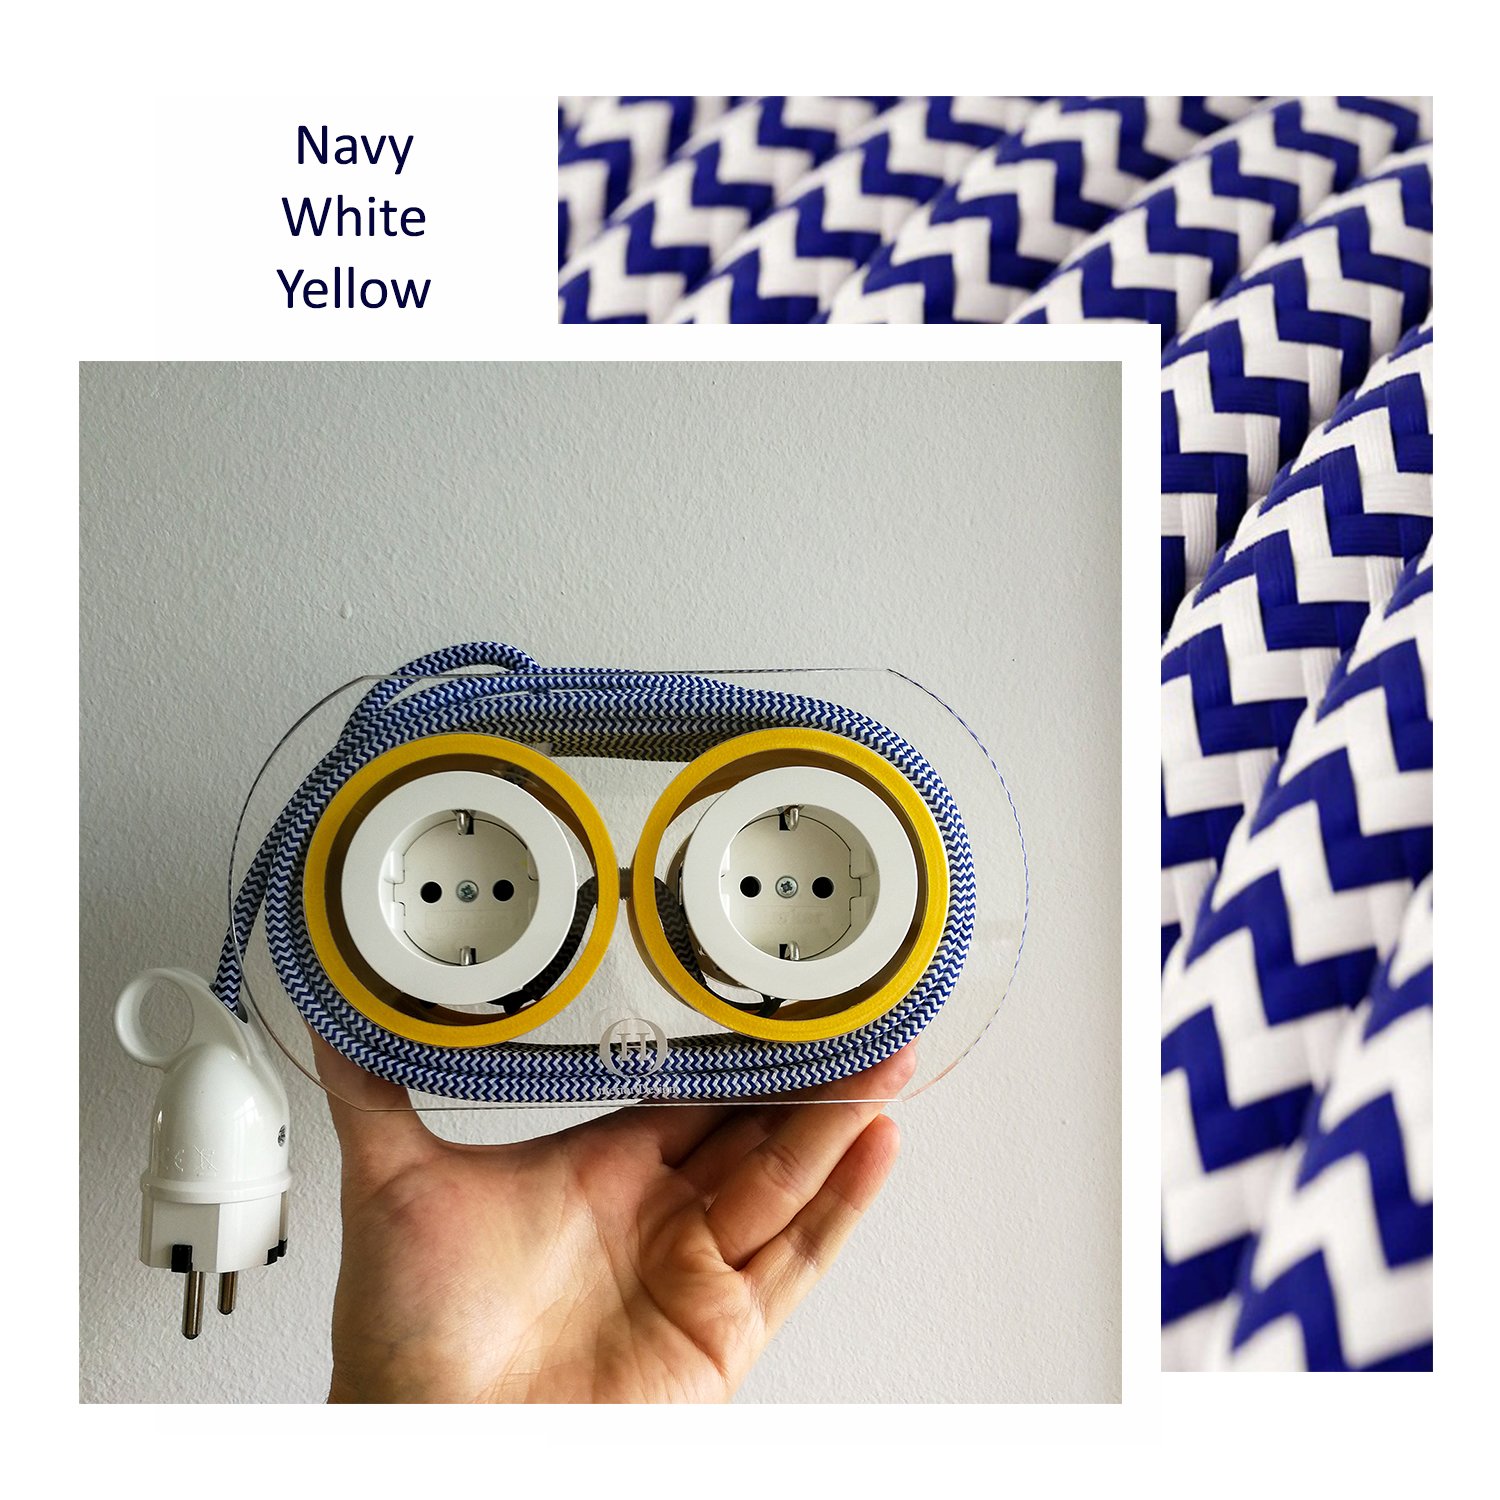 Extension Cord for 4 Plugs_ZigZag Navy & White & Yellow.jpg